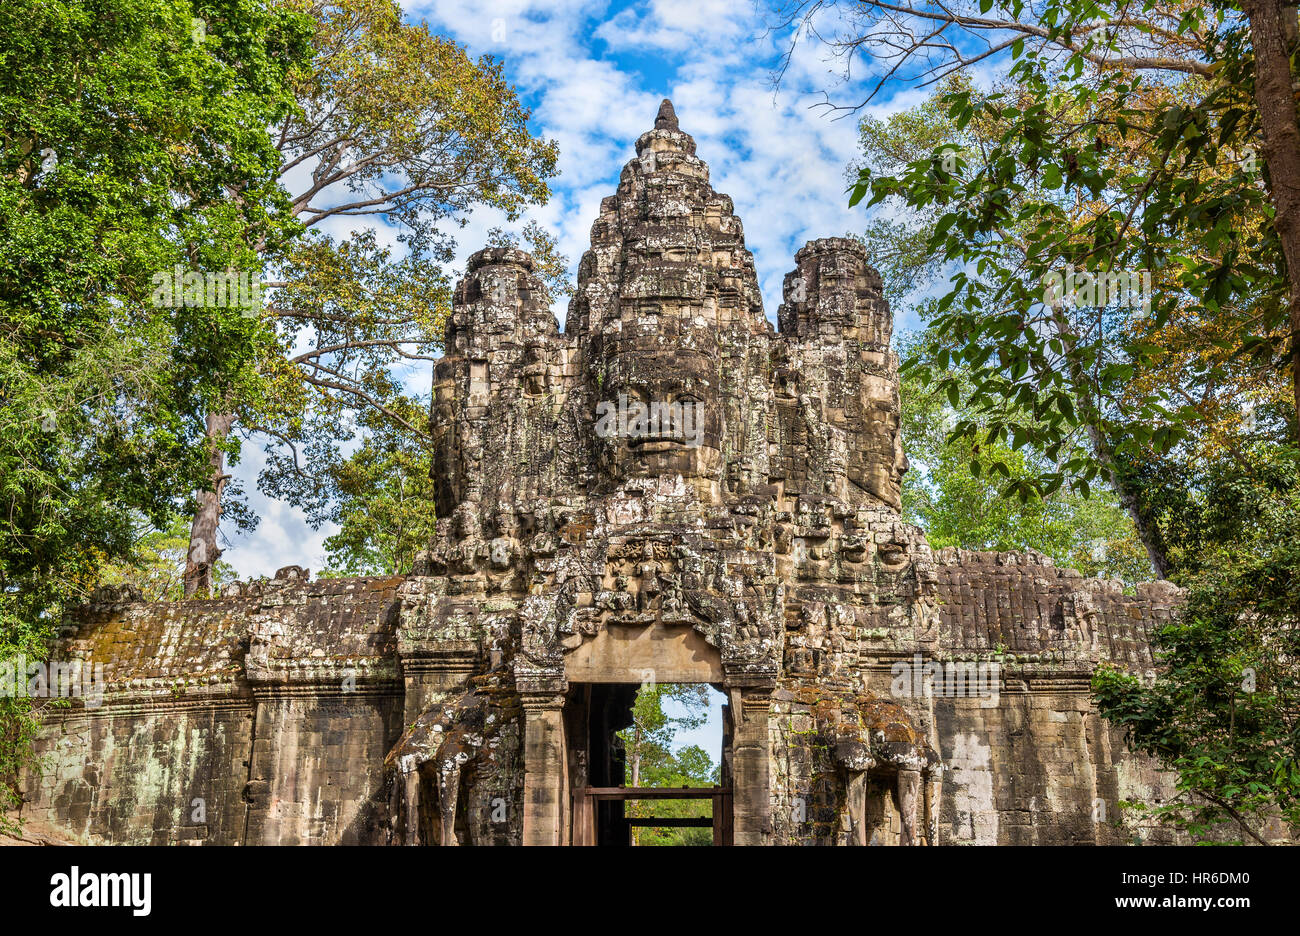 The Victory Gate of Angkor Thom, Cambodia Stock Photo